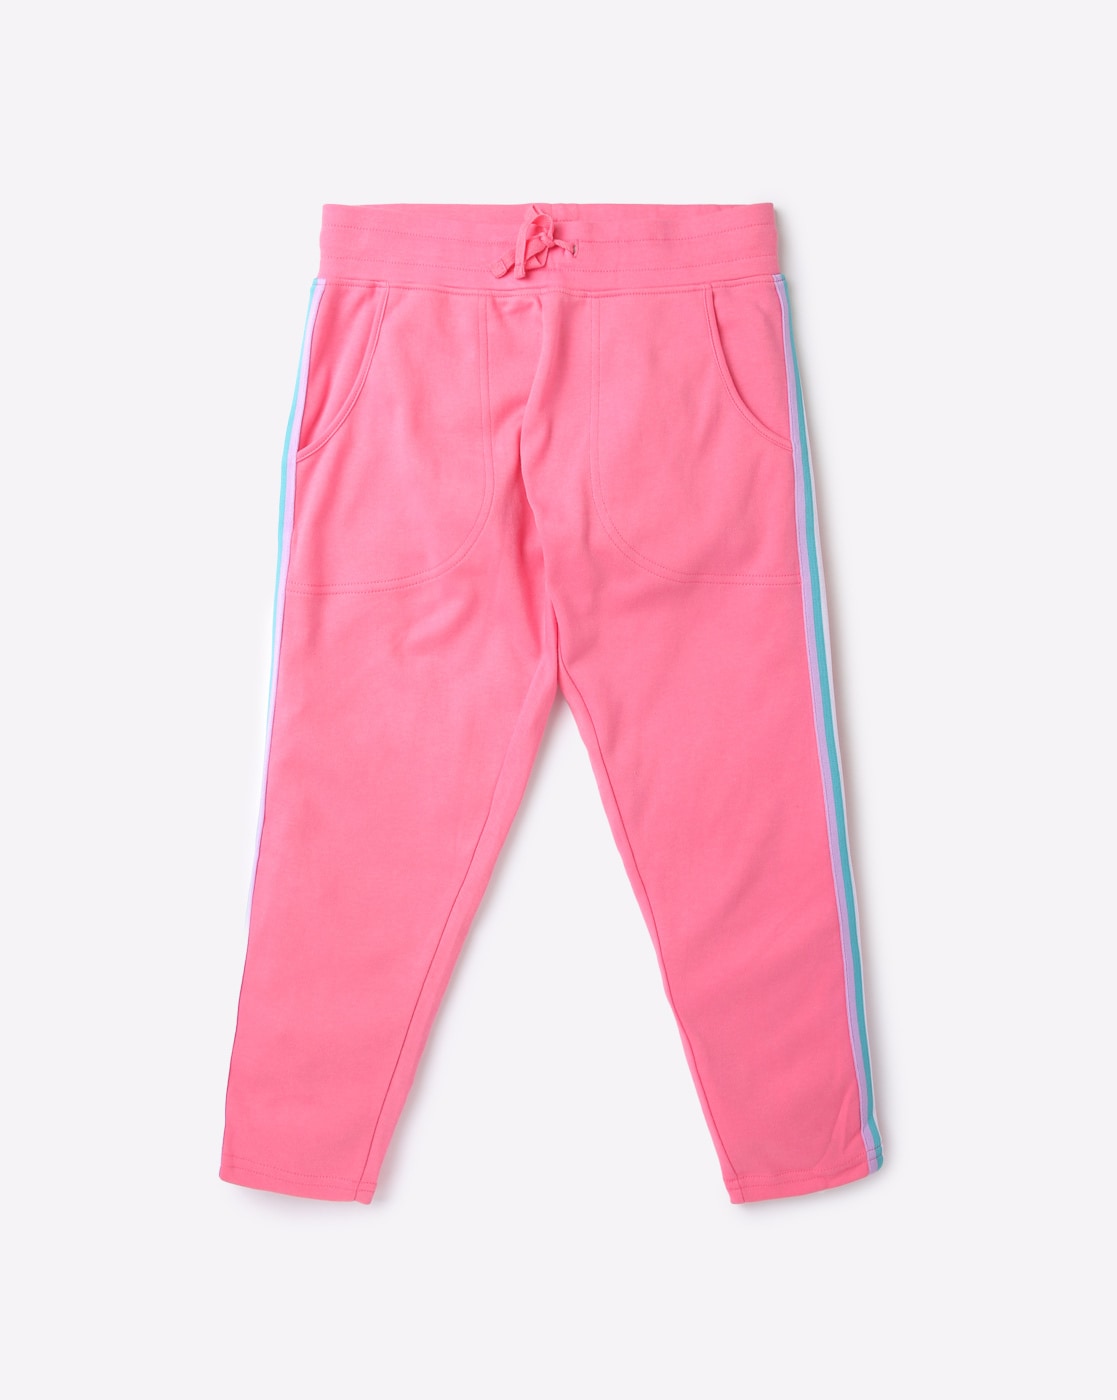 Track Pant For Girls Price in India  Buy Track Pant For Girls online at  Shopsyin